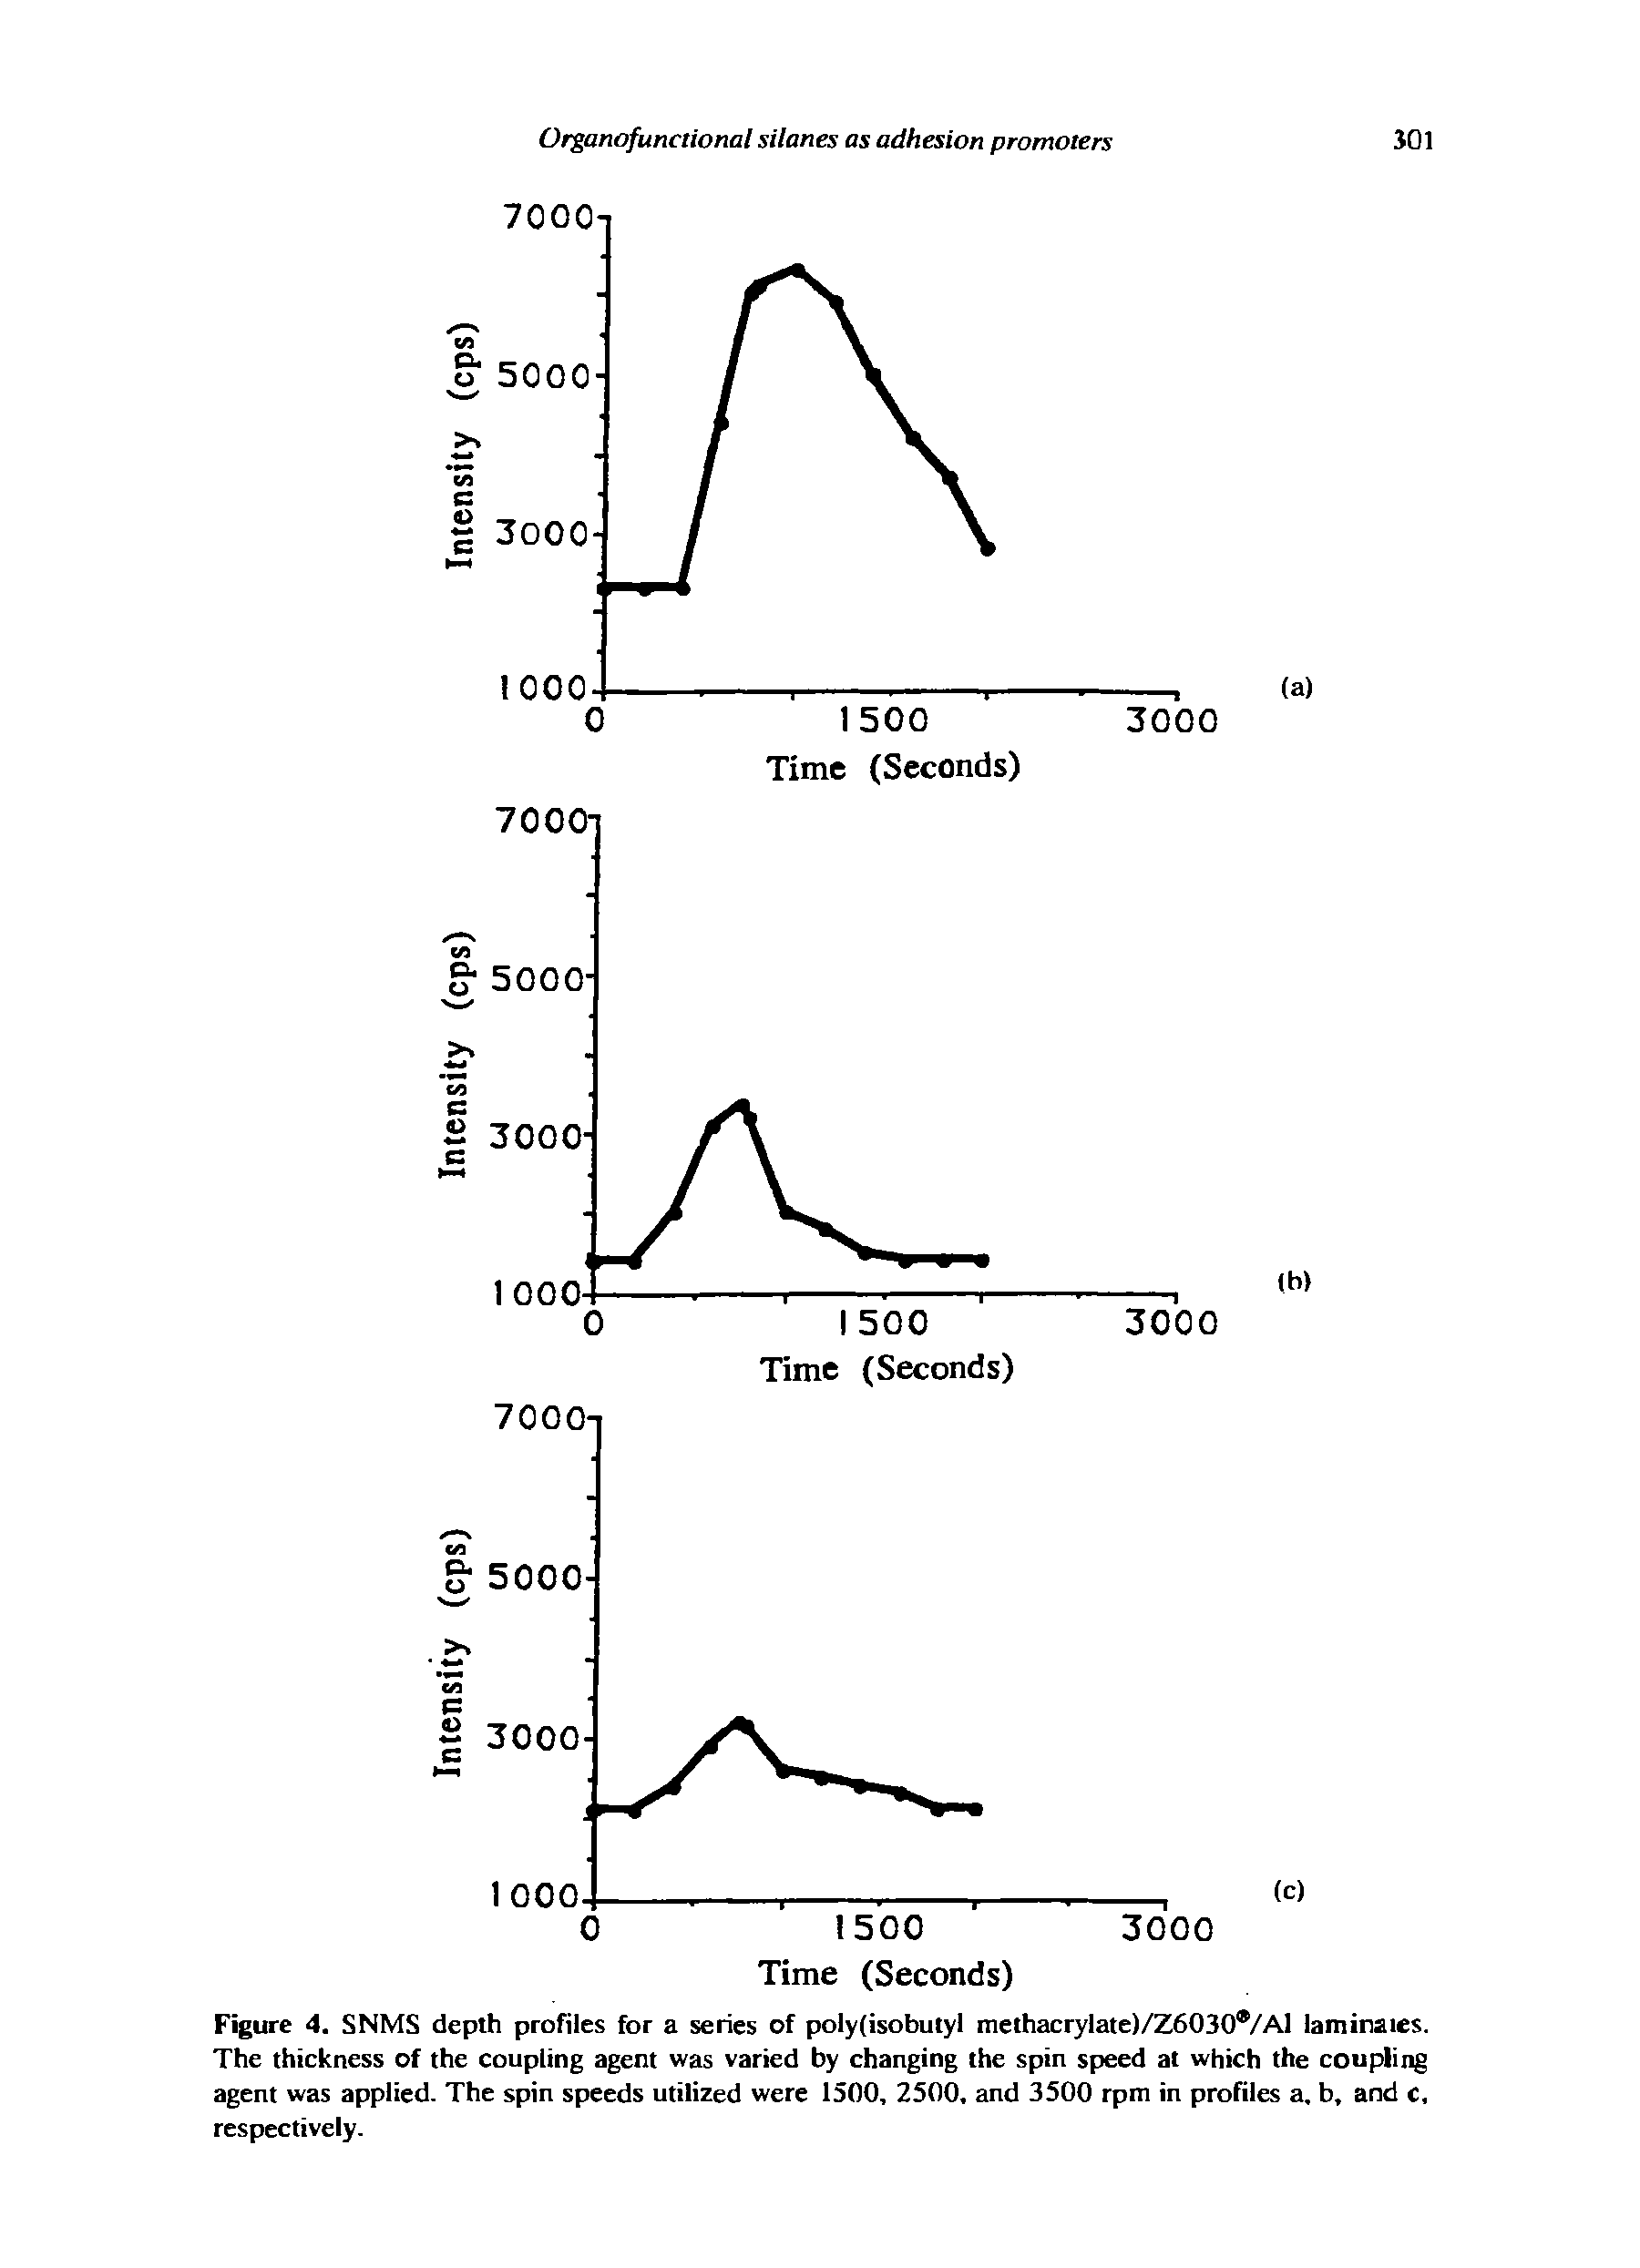 Figure 4. SNMS depth profiles for a series of poly(isobutyl methacrylate)/Z6030 /Al laminates. The thickness of the coupling agent was varied by changing the spin speed at which the coupling agent was applied. The spin speeds utilized were 1500, 2500, and 3500 rpm in profiles a, b, and c, respectively.